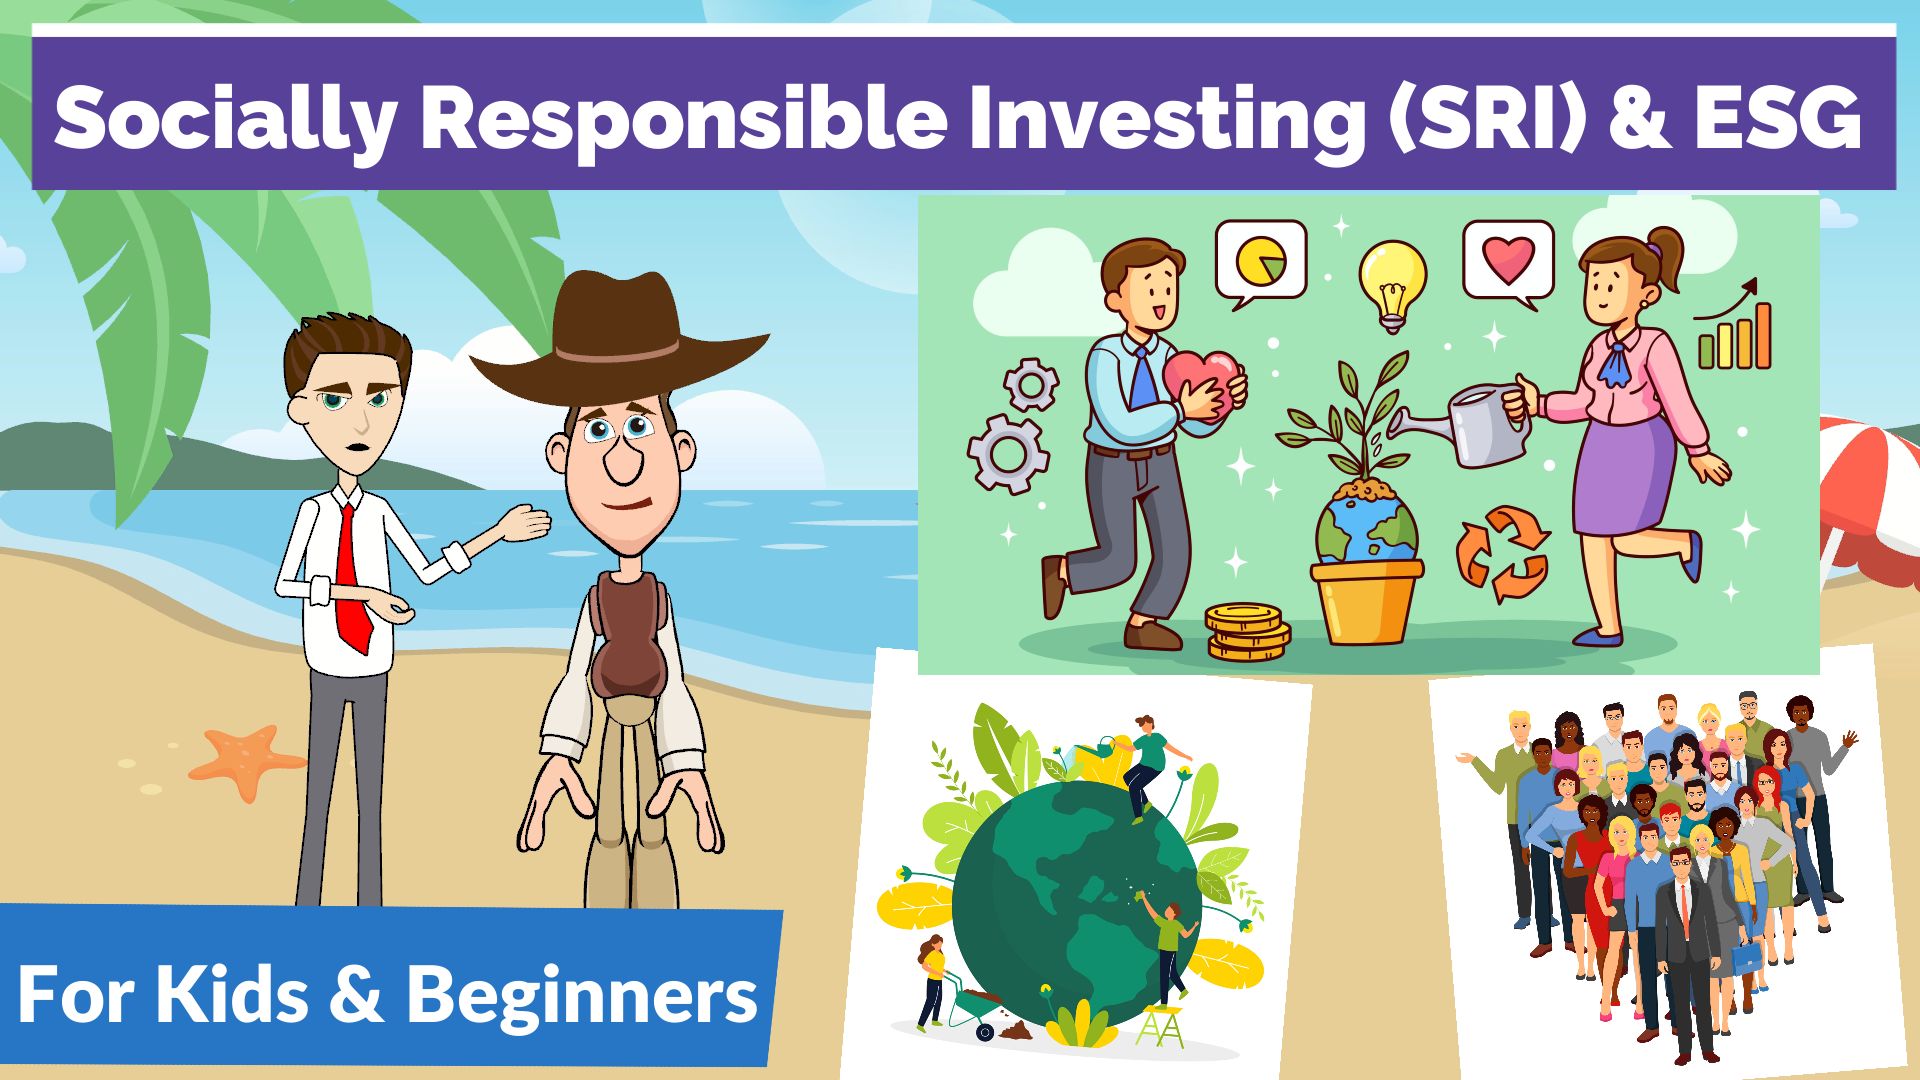 What are Socially Responsible Investing - SRI - and ESG